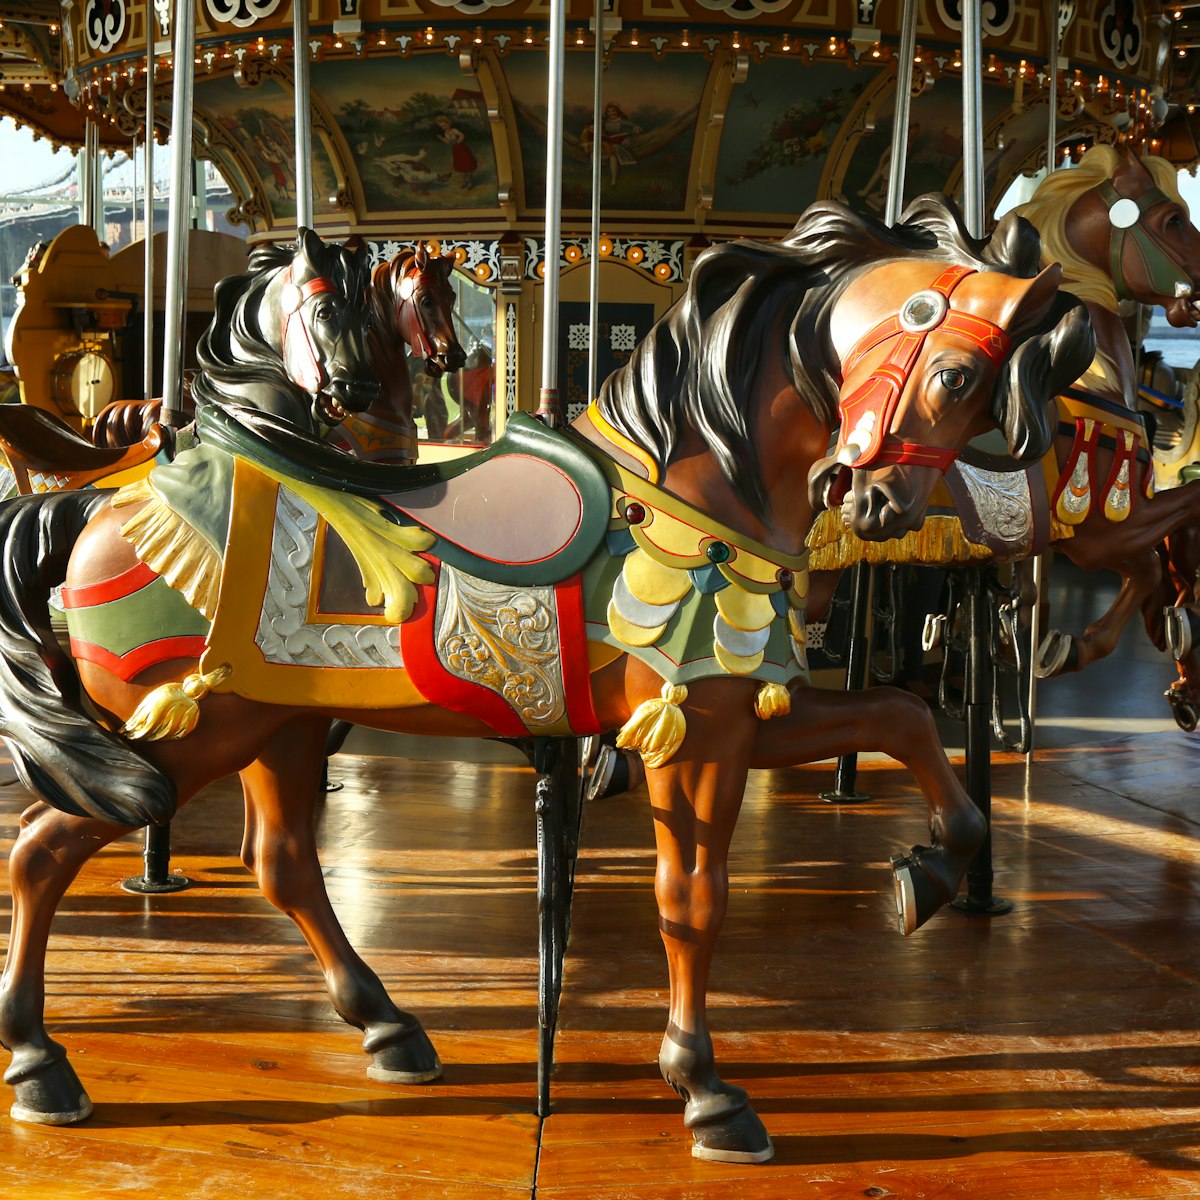 BROOKLYN, NY - MAY 26:Horses on a traditional fairground Jane's carousel in Brooklyn on May 26, 2013. It is historic and beautifully restored carousel build in 1922 a gift of Jane and David Walentas ; Shutterstock ID 147106253; Your name (First / Last): Josh Vogel; Project no. or GL code: 56530; Network activity no. or Cost Centre: Online-Design; Product or Project: 65050/7529/Josh Vogel/LP.com Destination Galleries